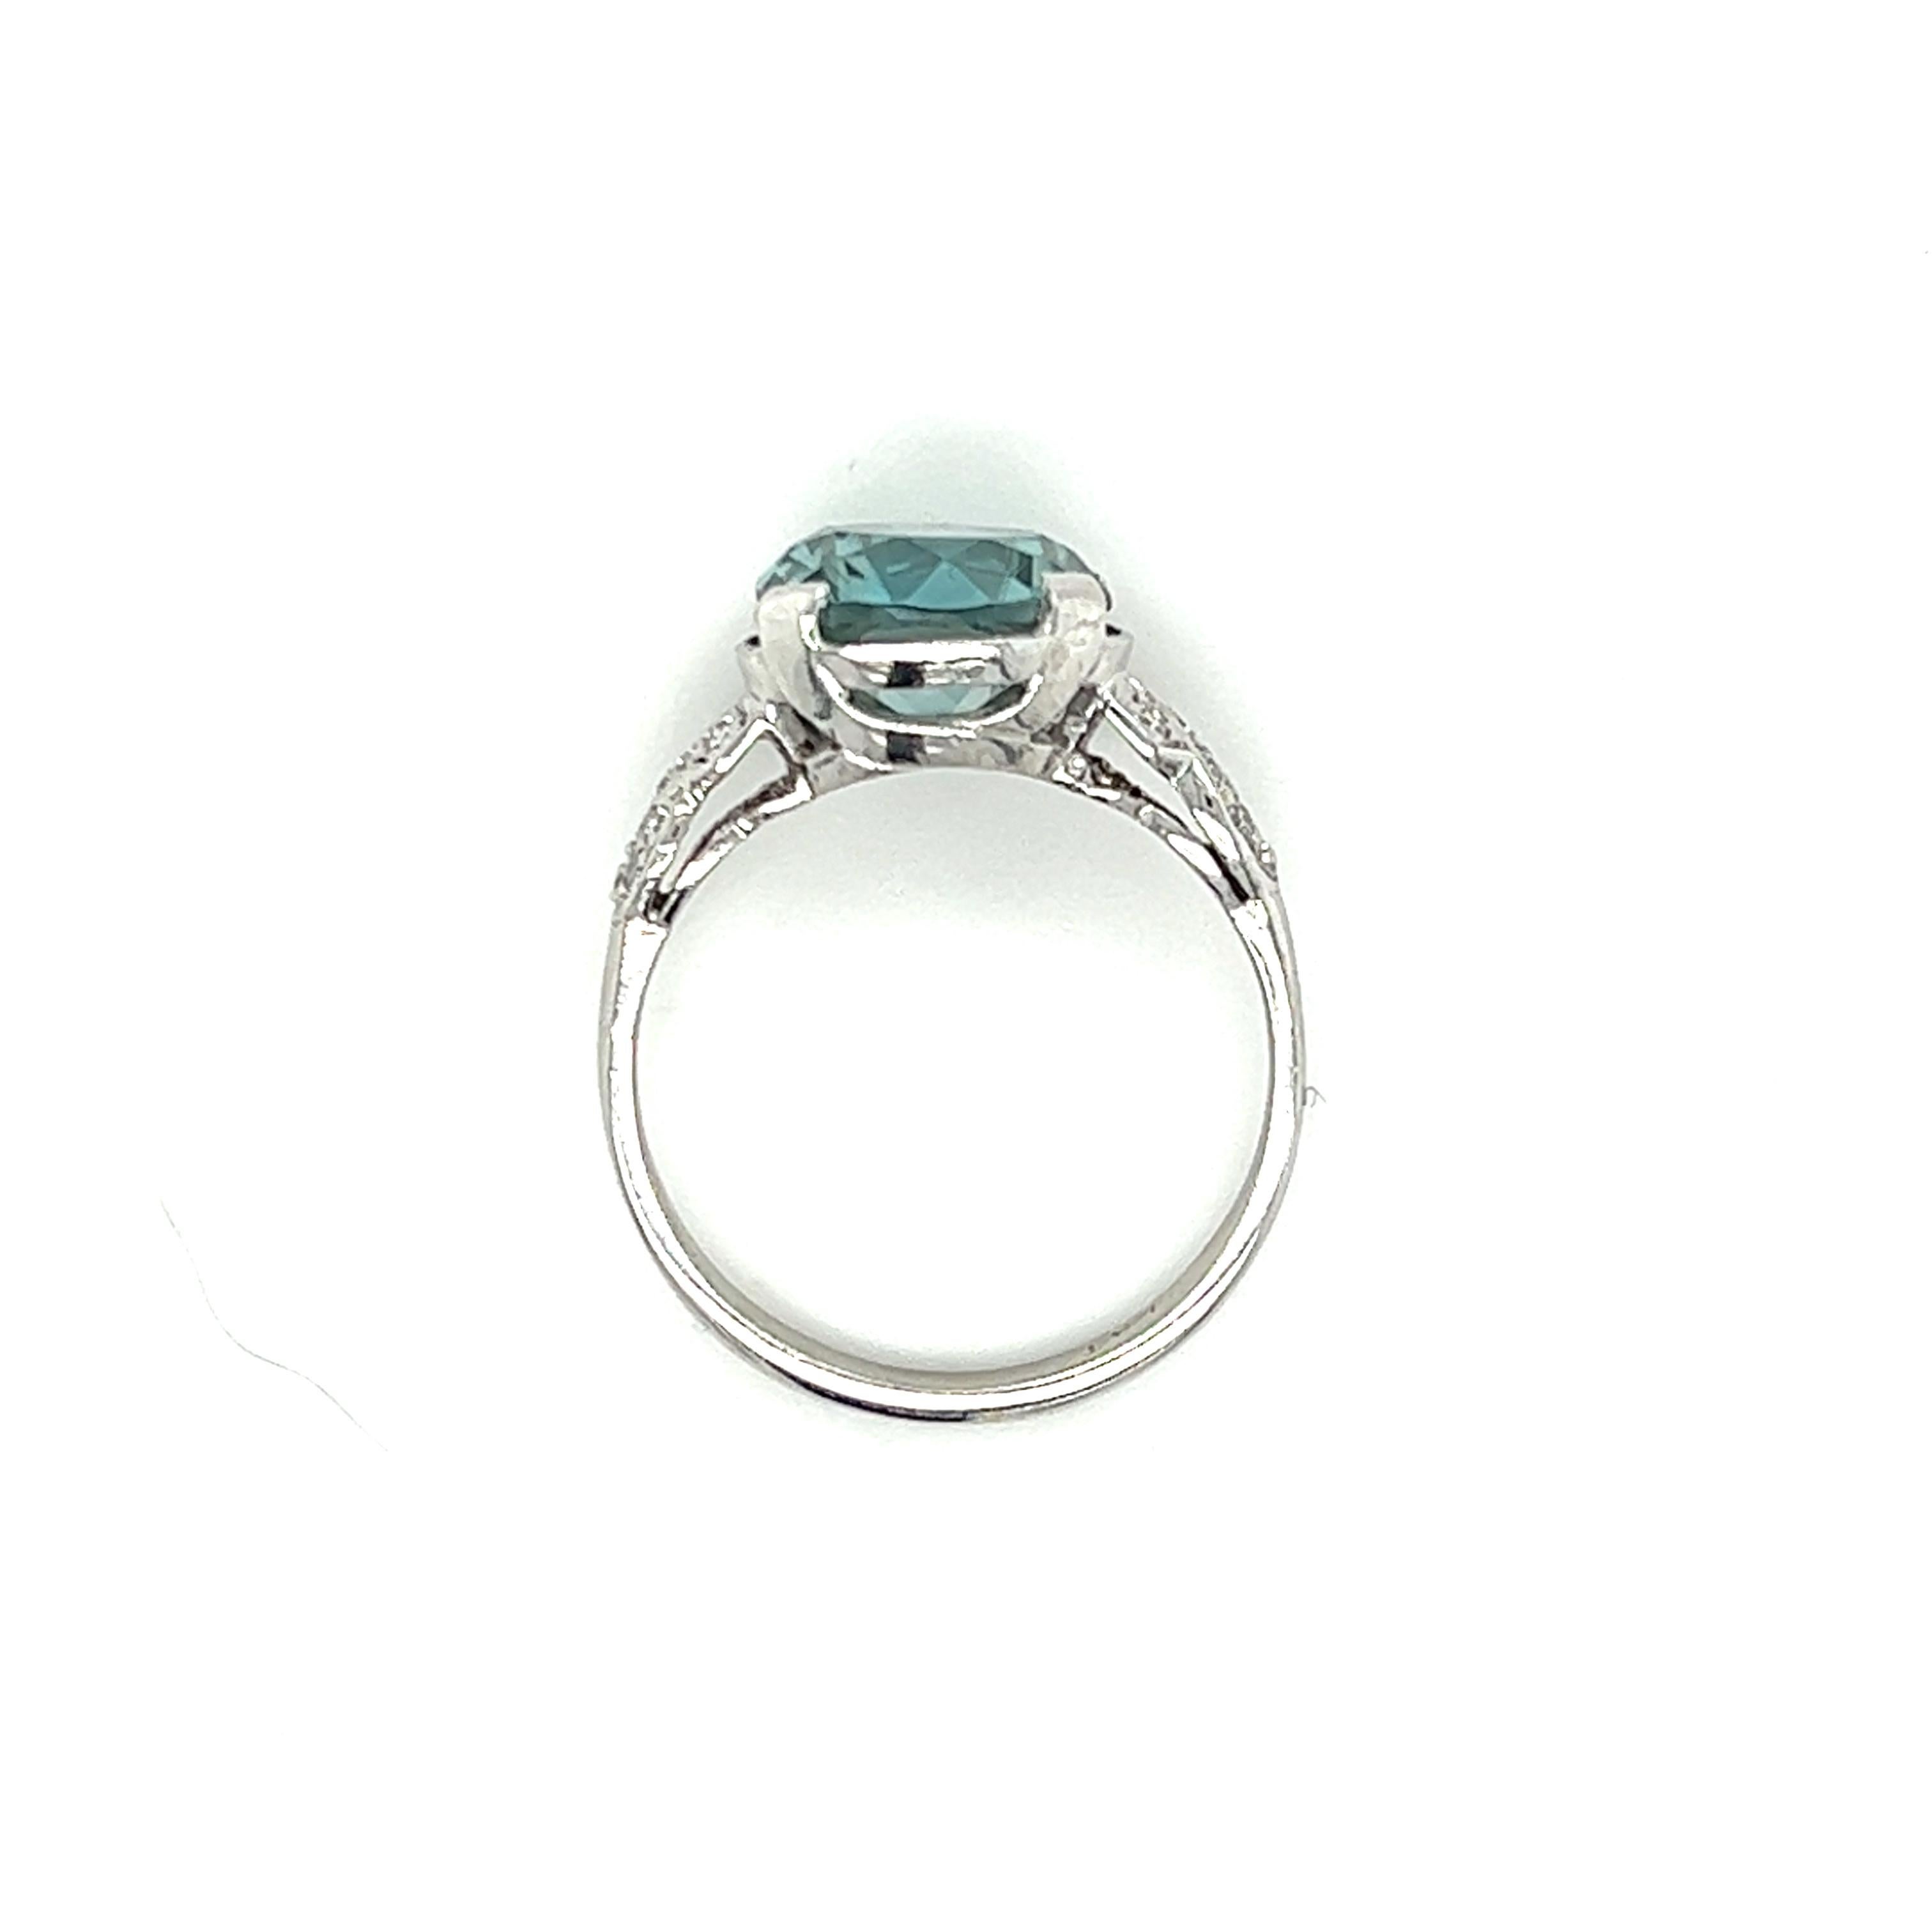 One platinum Retro design ring set with one 9.7mm round natural blue zircon stone, flanked by sixteen (16) round brilliant cut diamonds, approximately 0.15-carat total weight with matching H/I color and SI1 clarity. The ring is a finger size 6.5